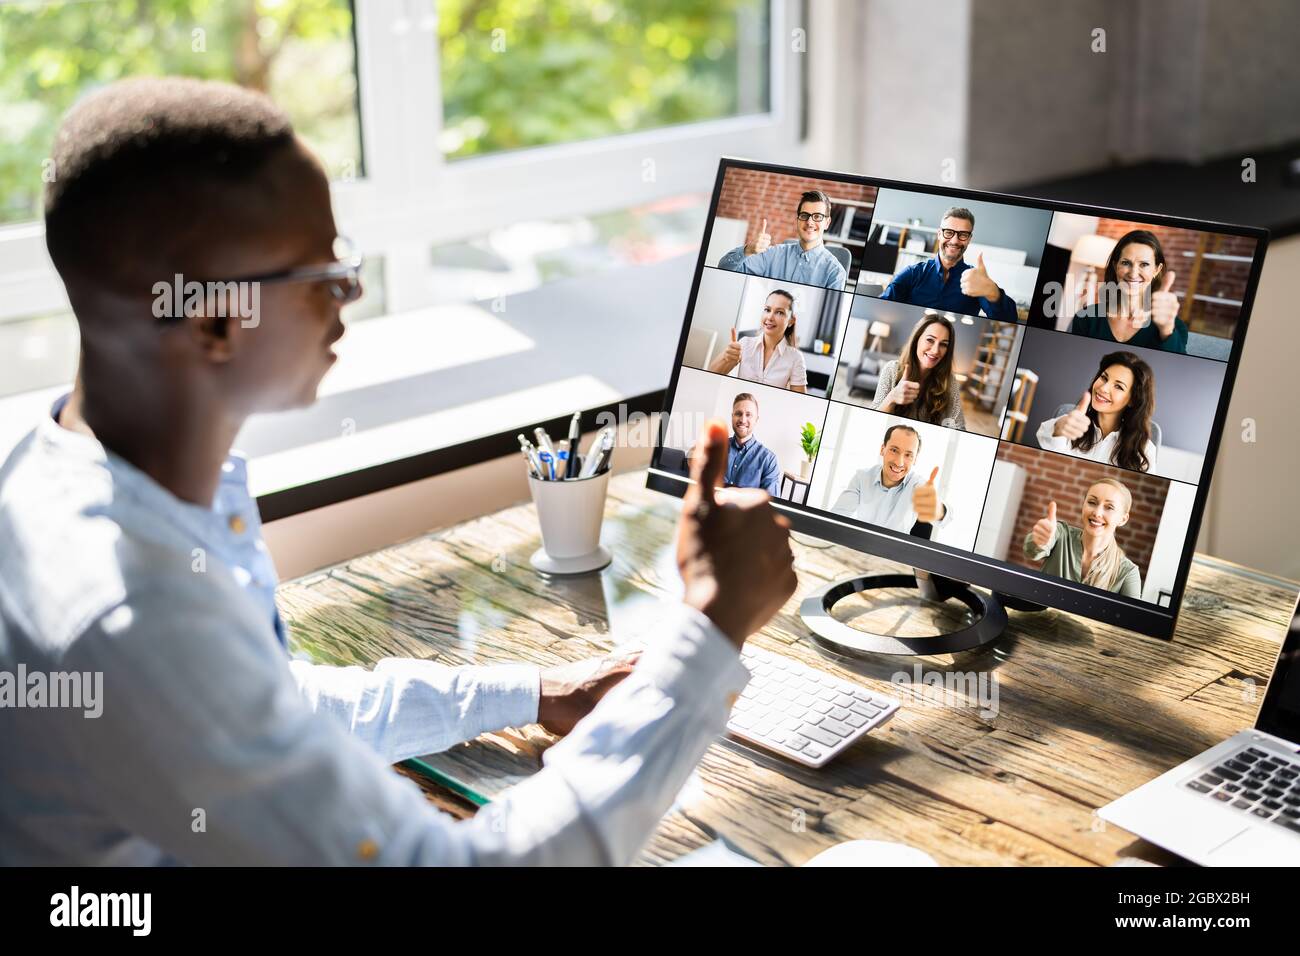 Video Conference Webinar Call On Business Laptop Thumbs Up Stock Photo